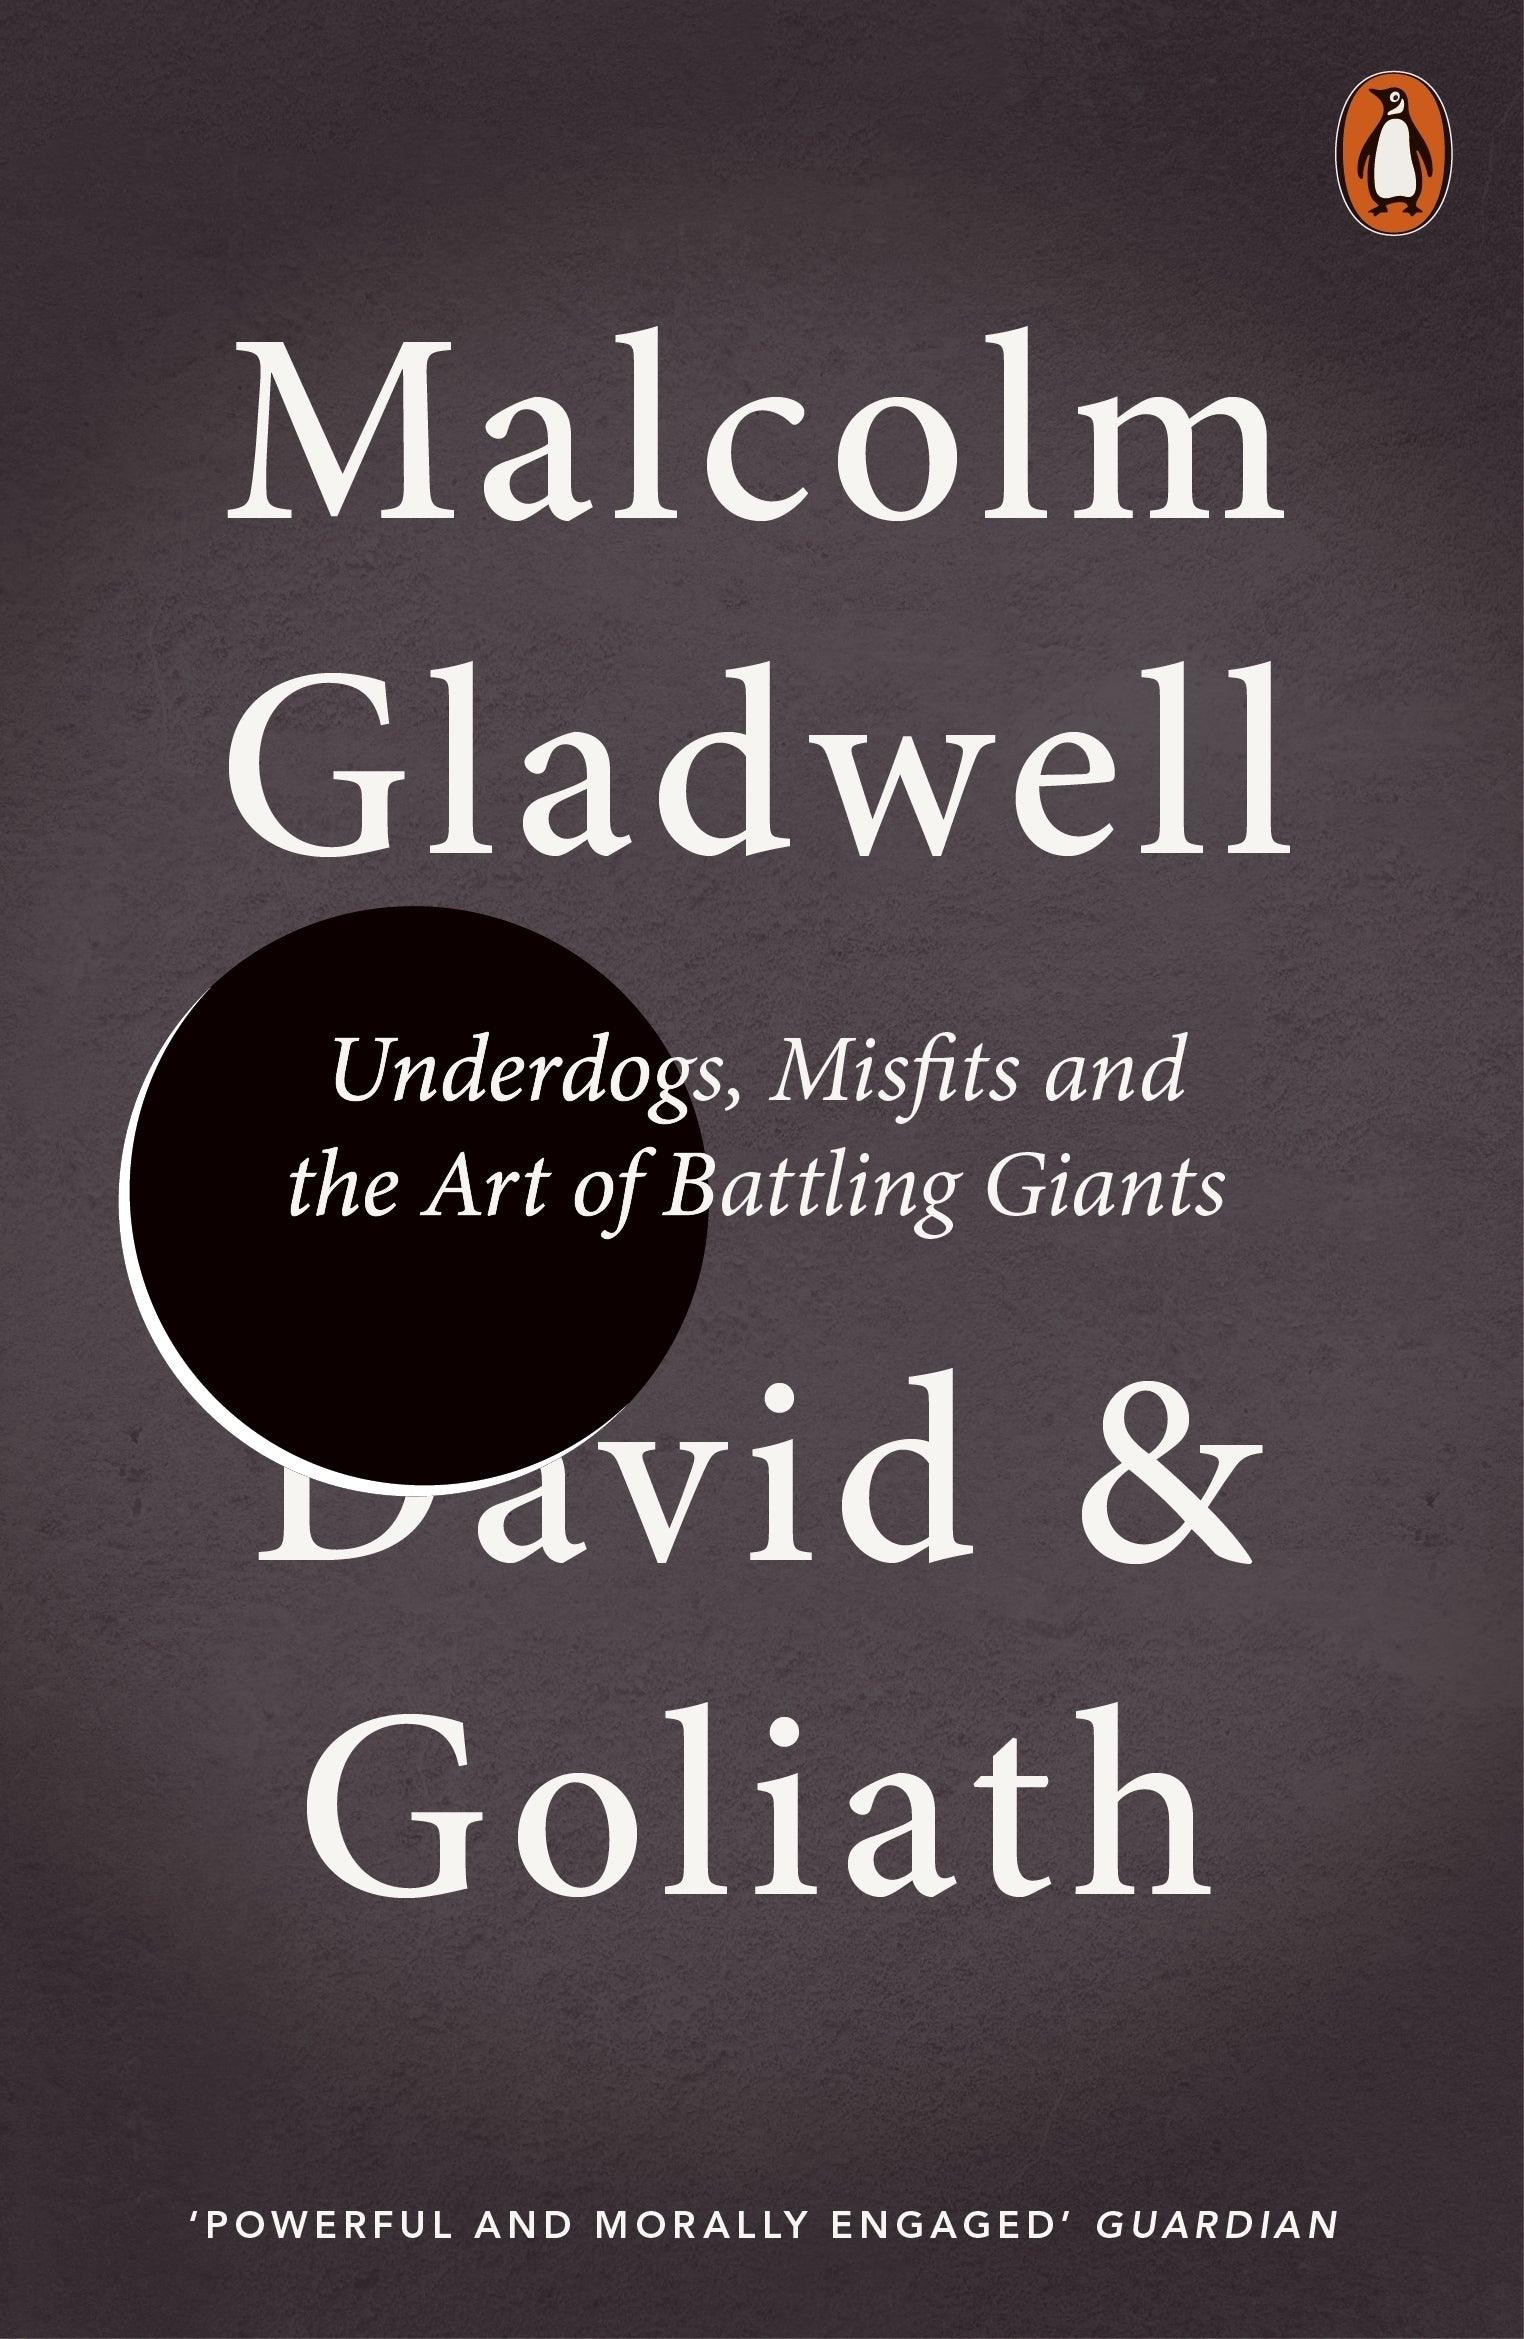 David and Goliath: Underdogs, Misfits and the Art of Battling Giants - BIBLIONEPAL